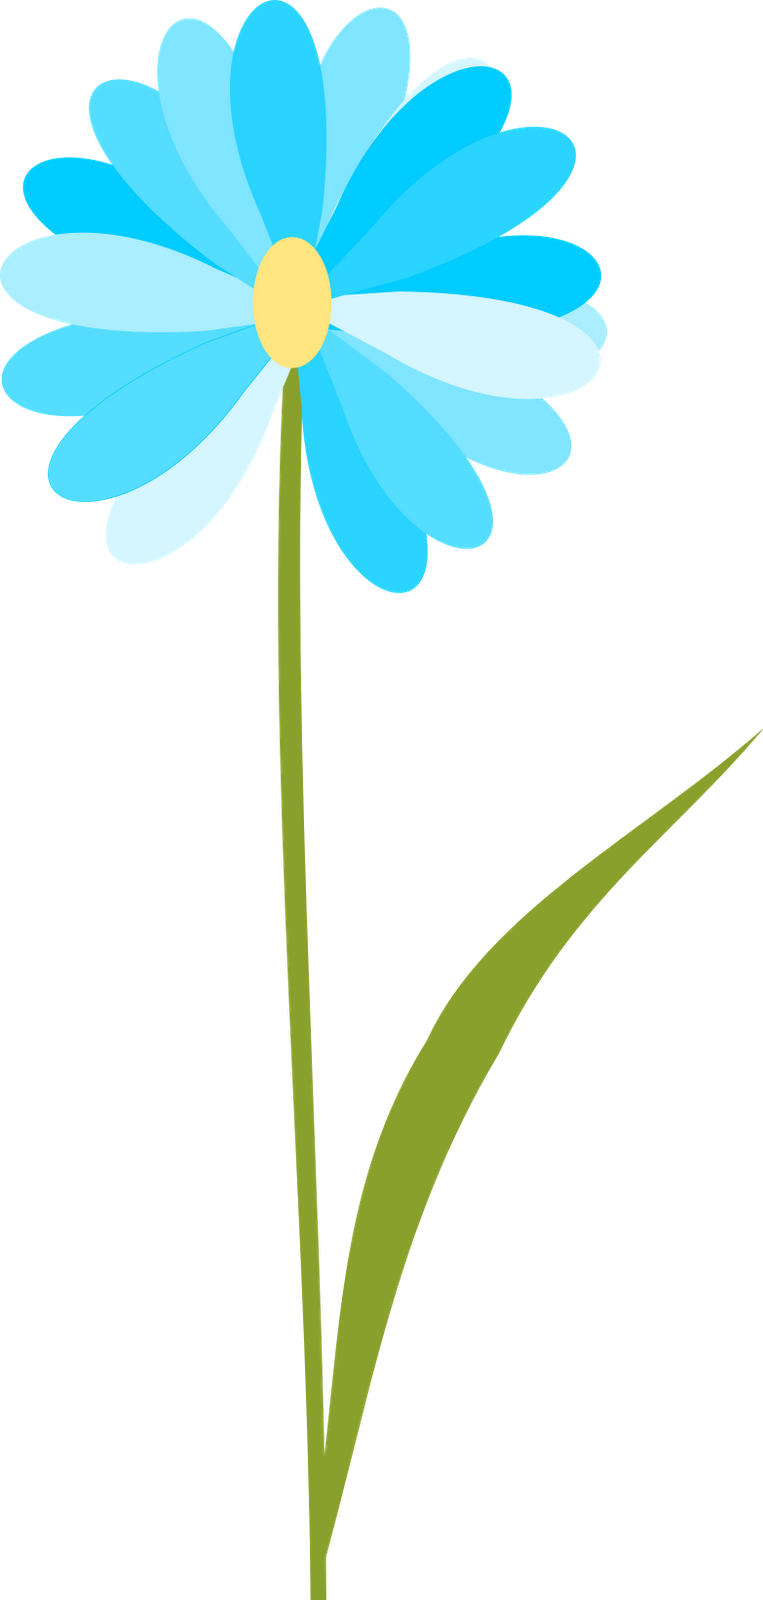 free flower clipart with transparent background - photo #1